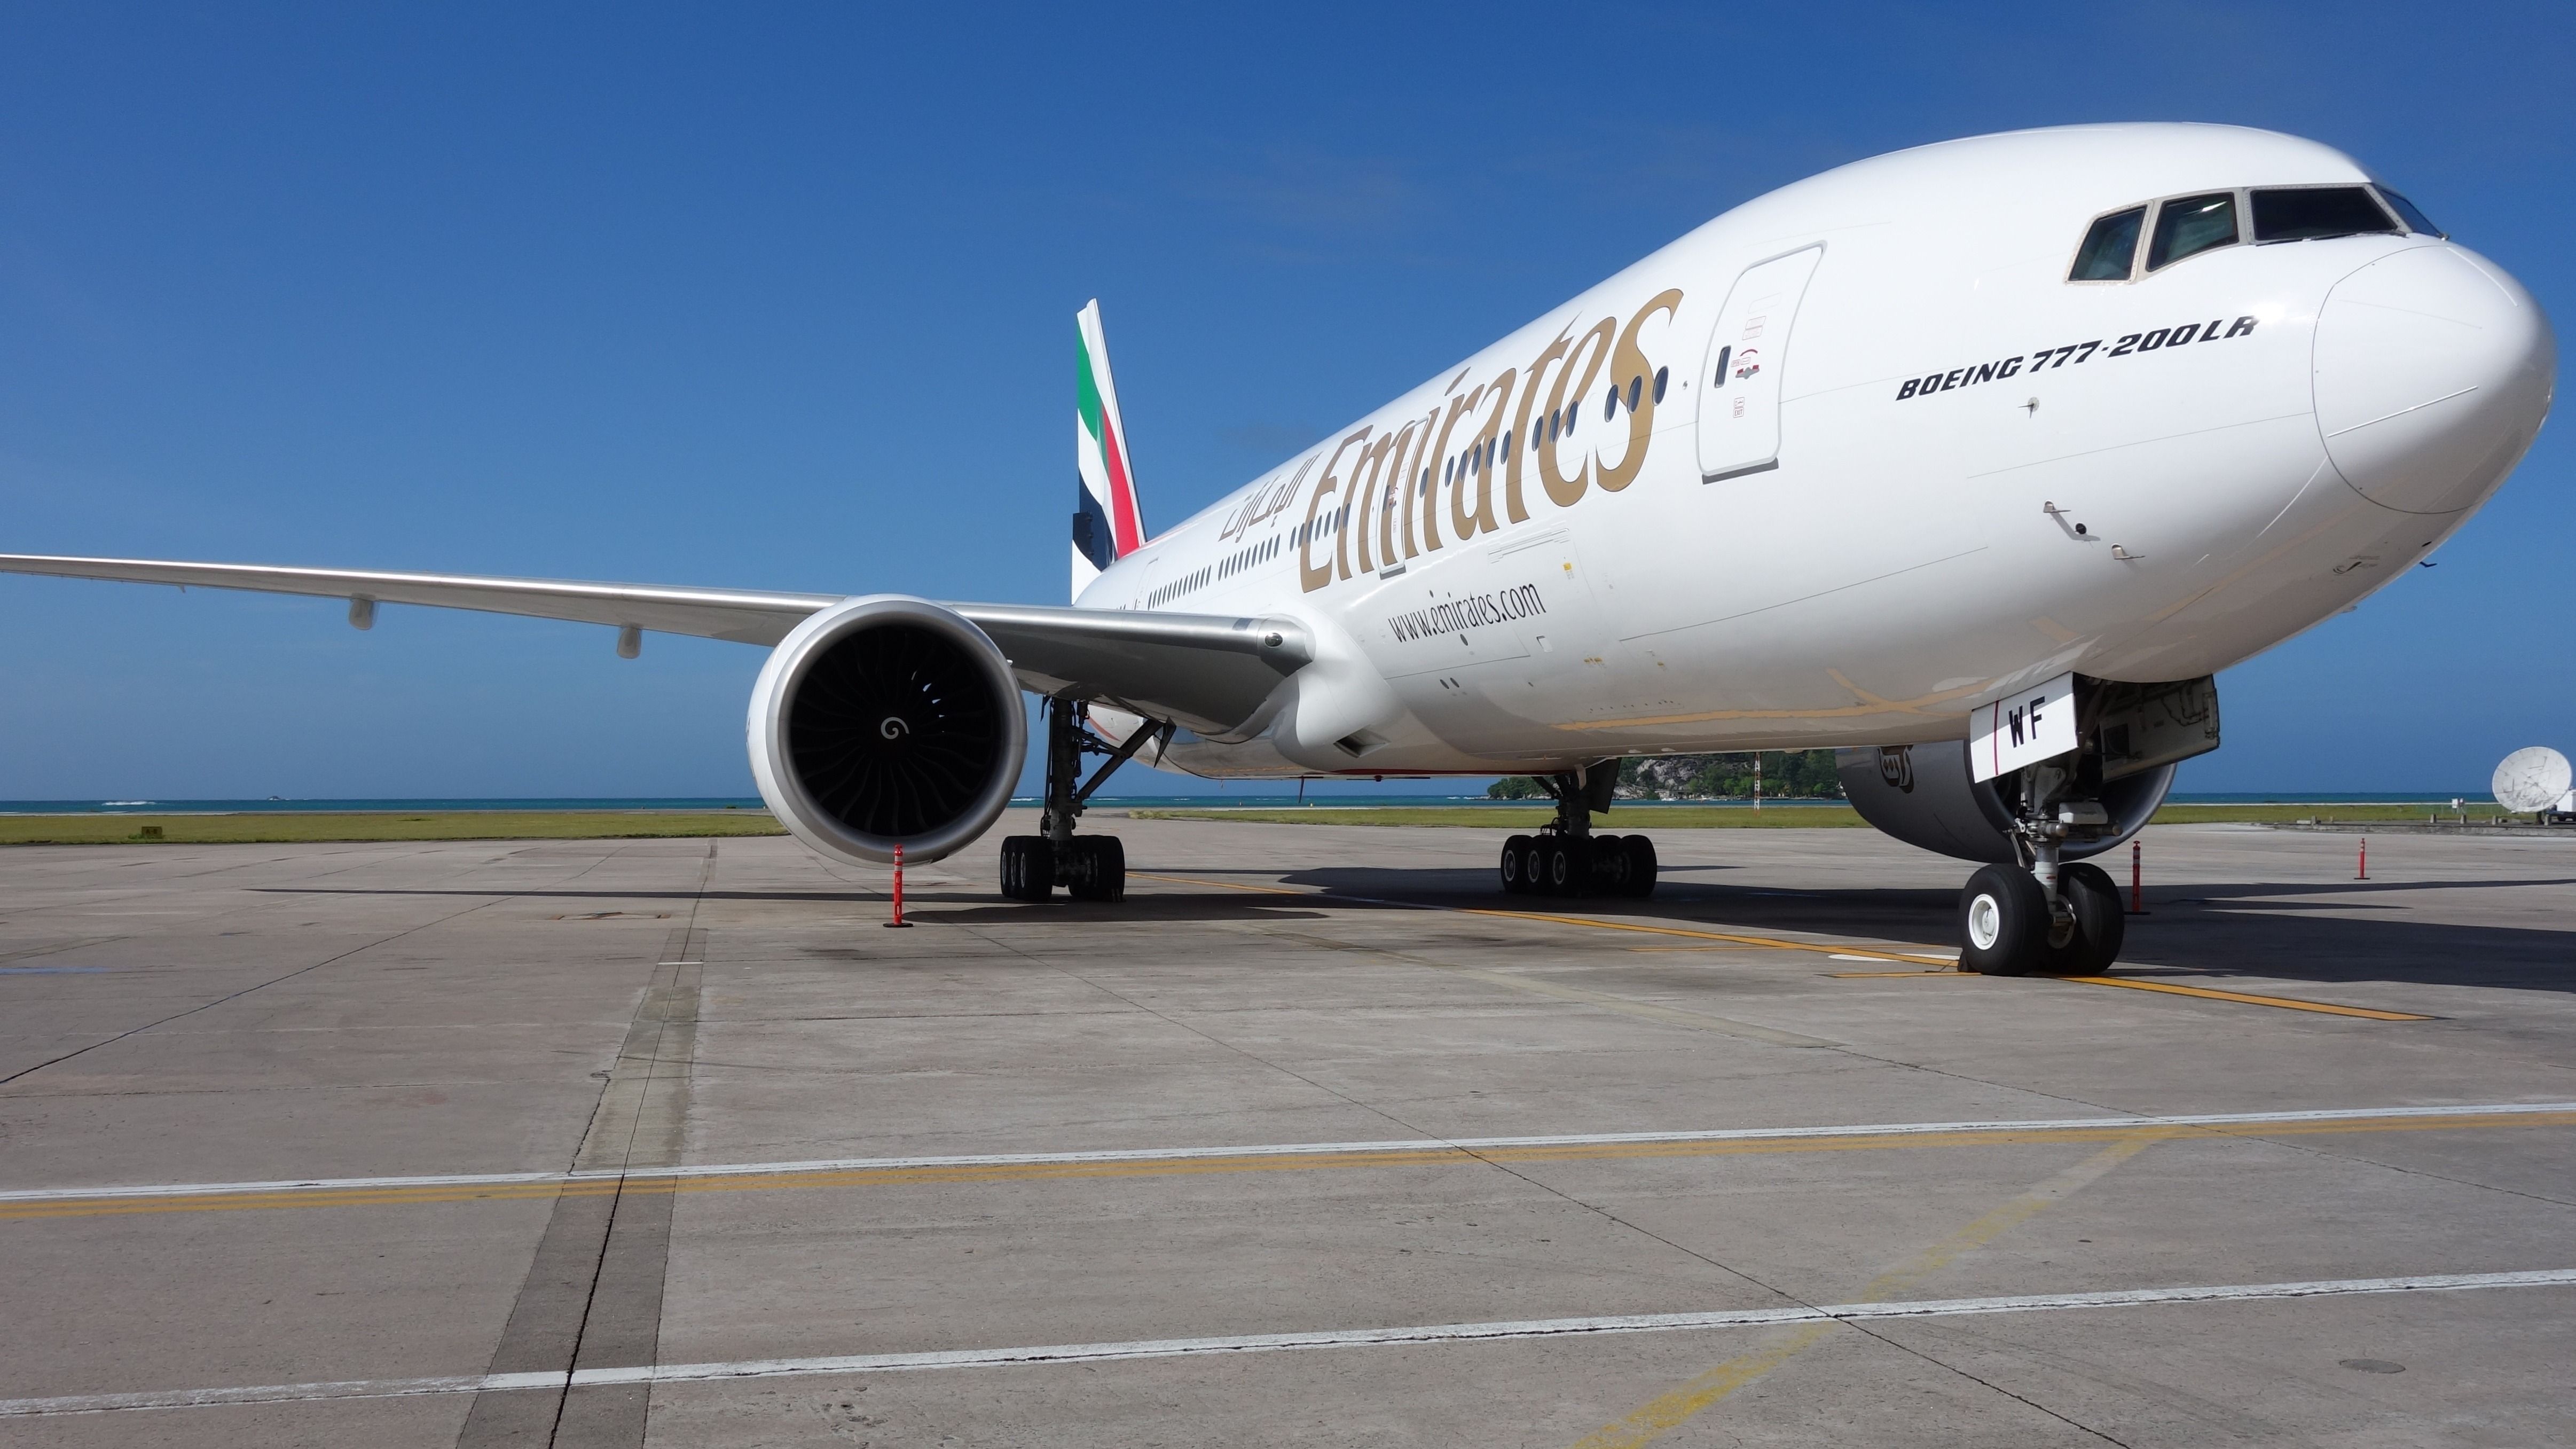 Emirates Boeing 777-200LR parked at an airport